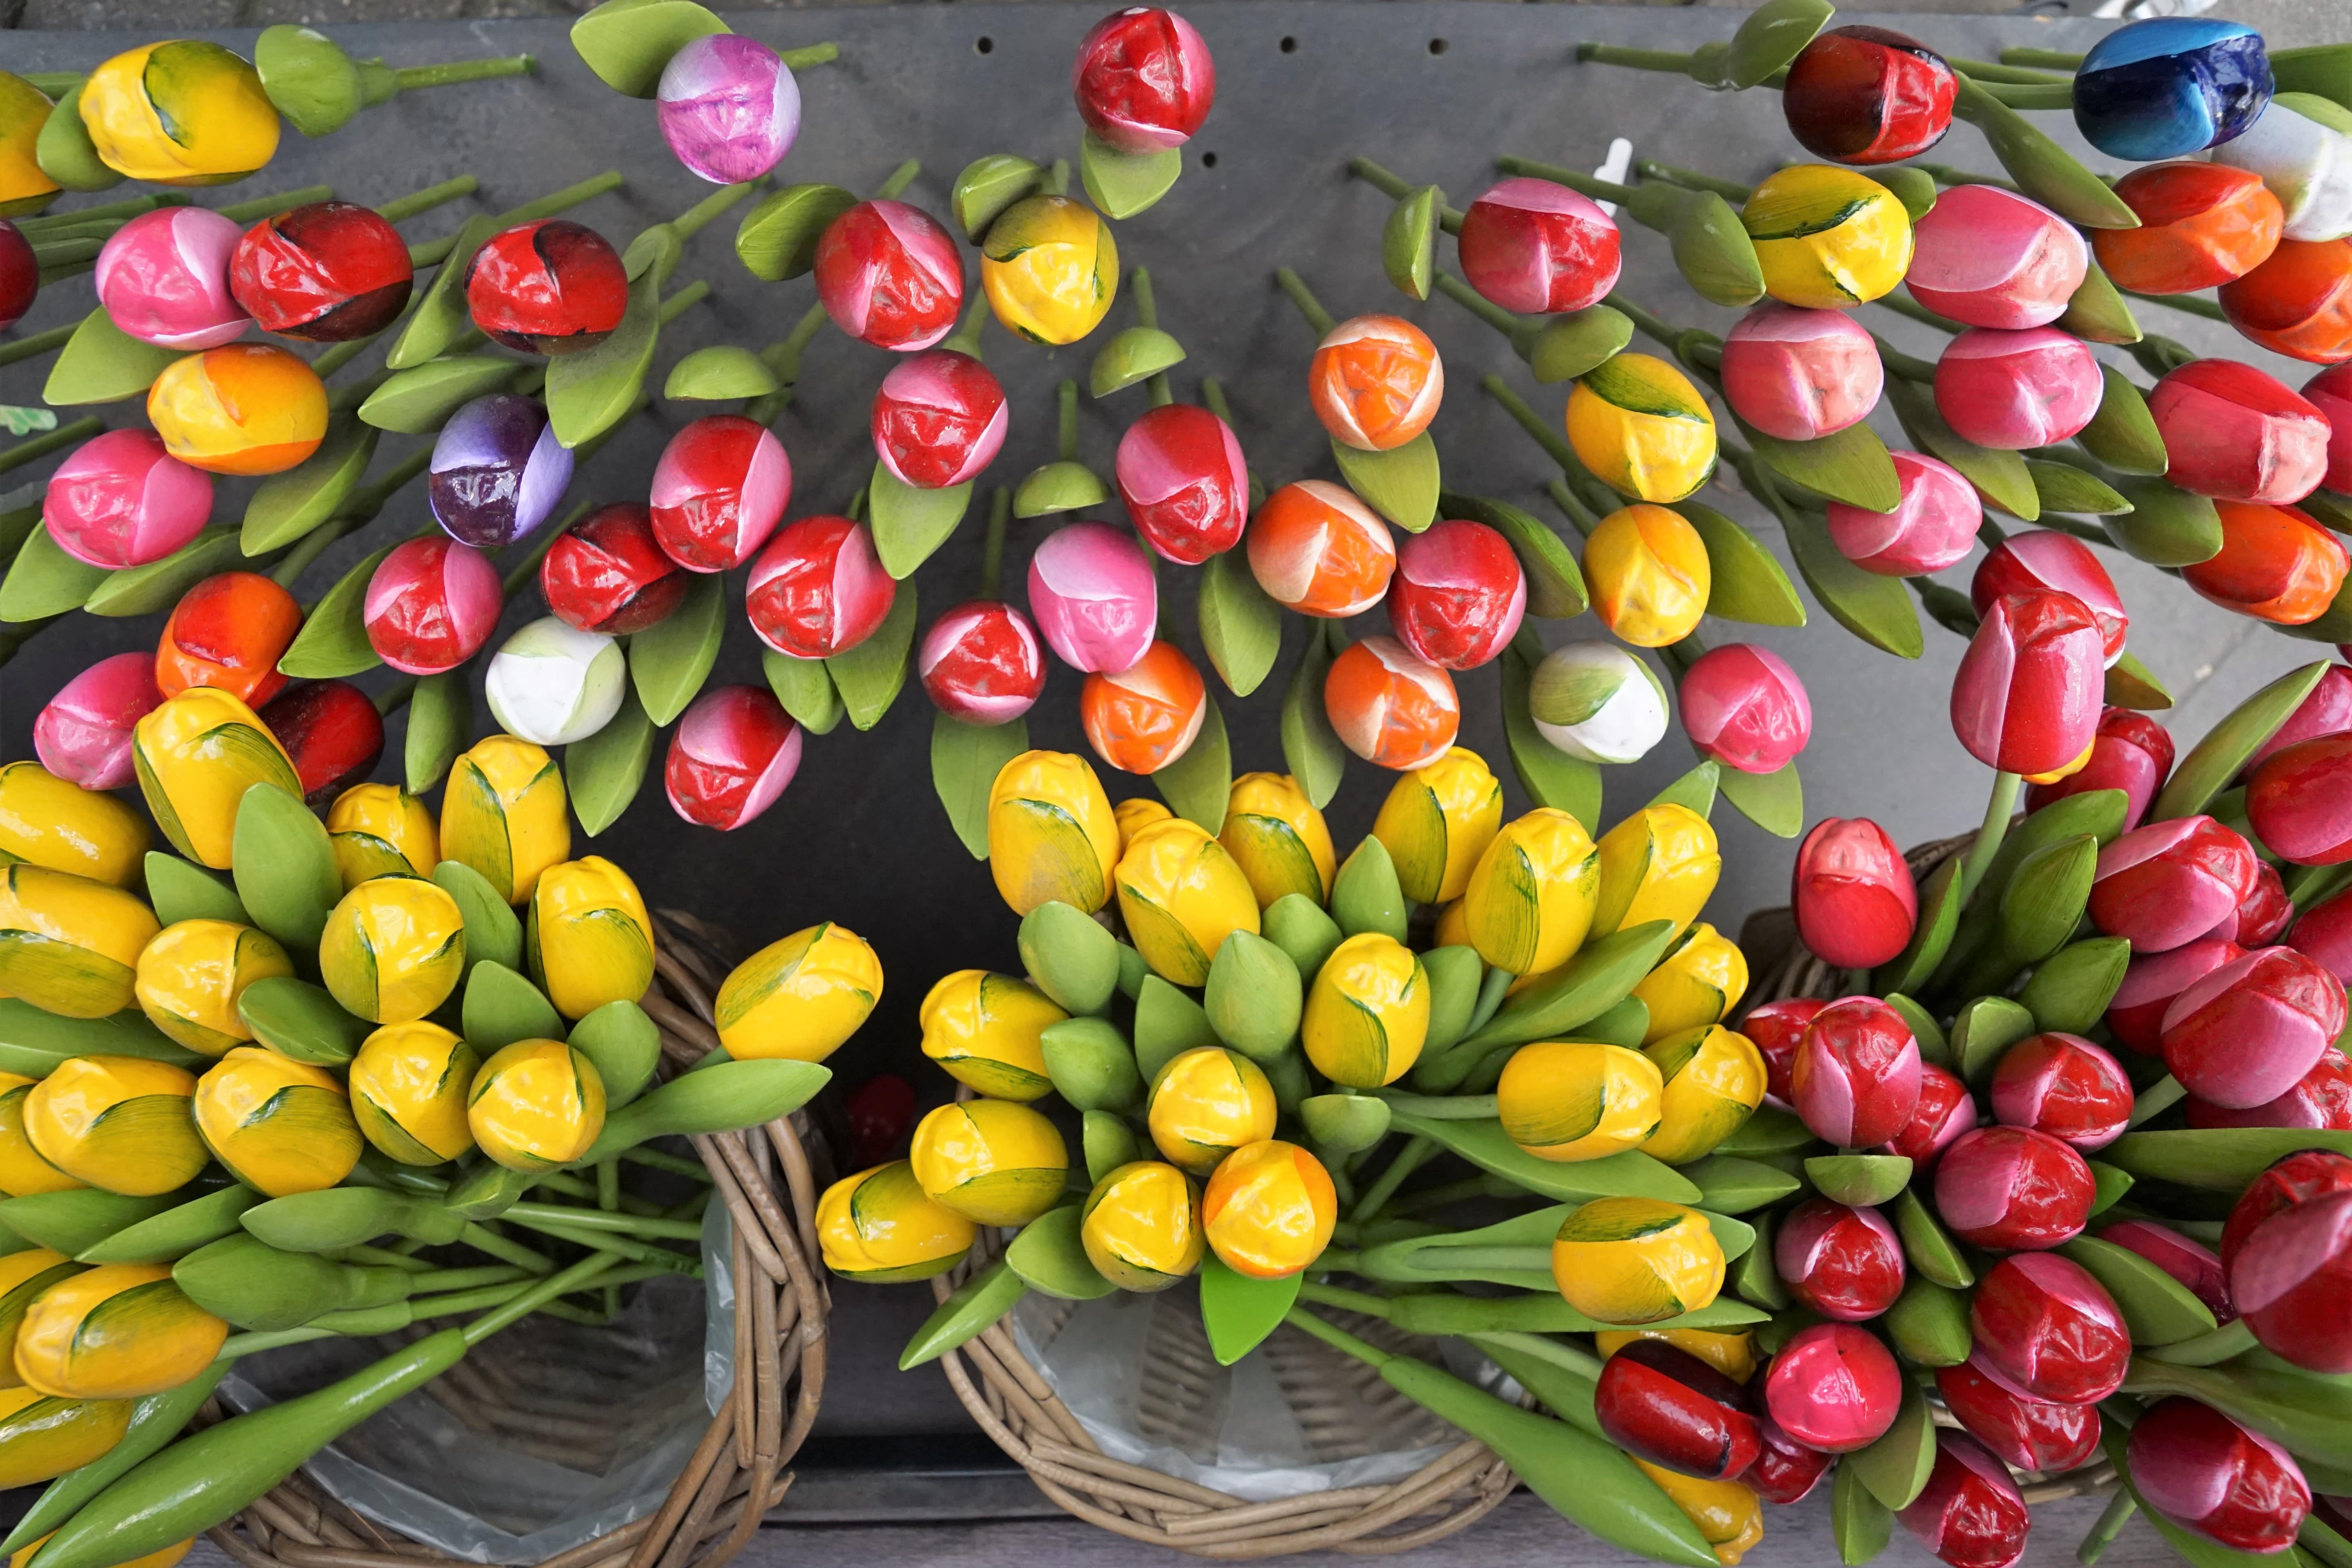 An Amsterdam mini break offers tulips, but much more besides